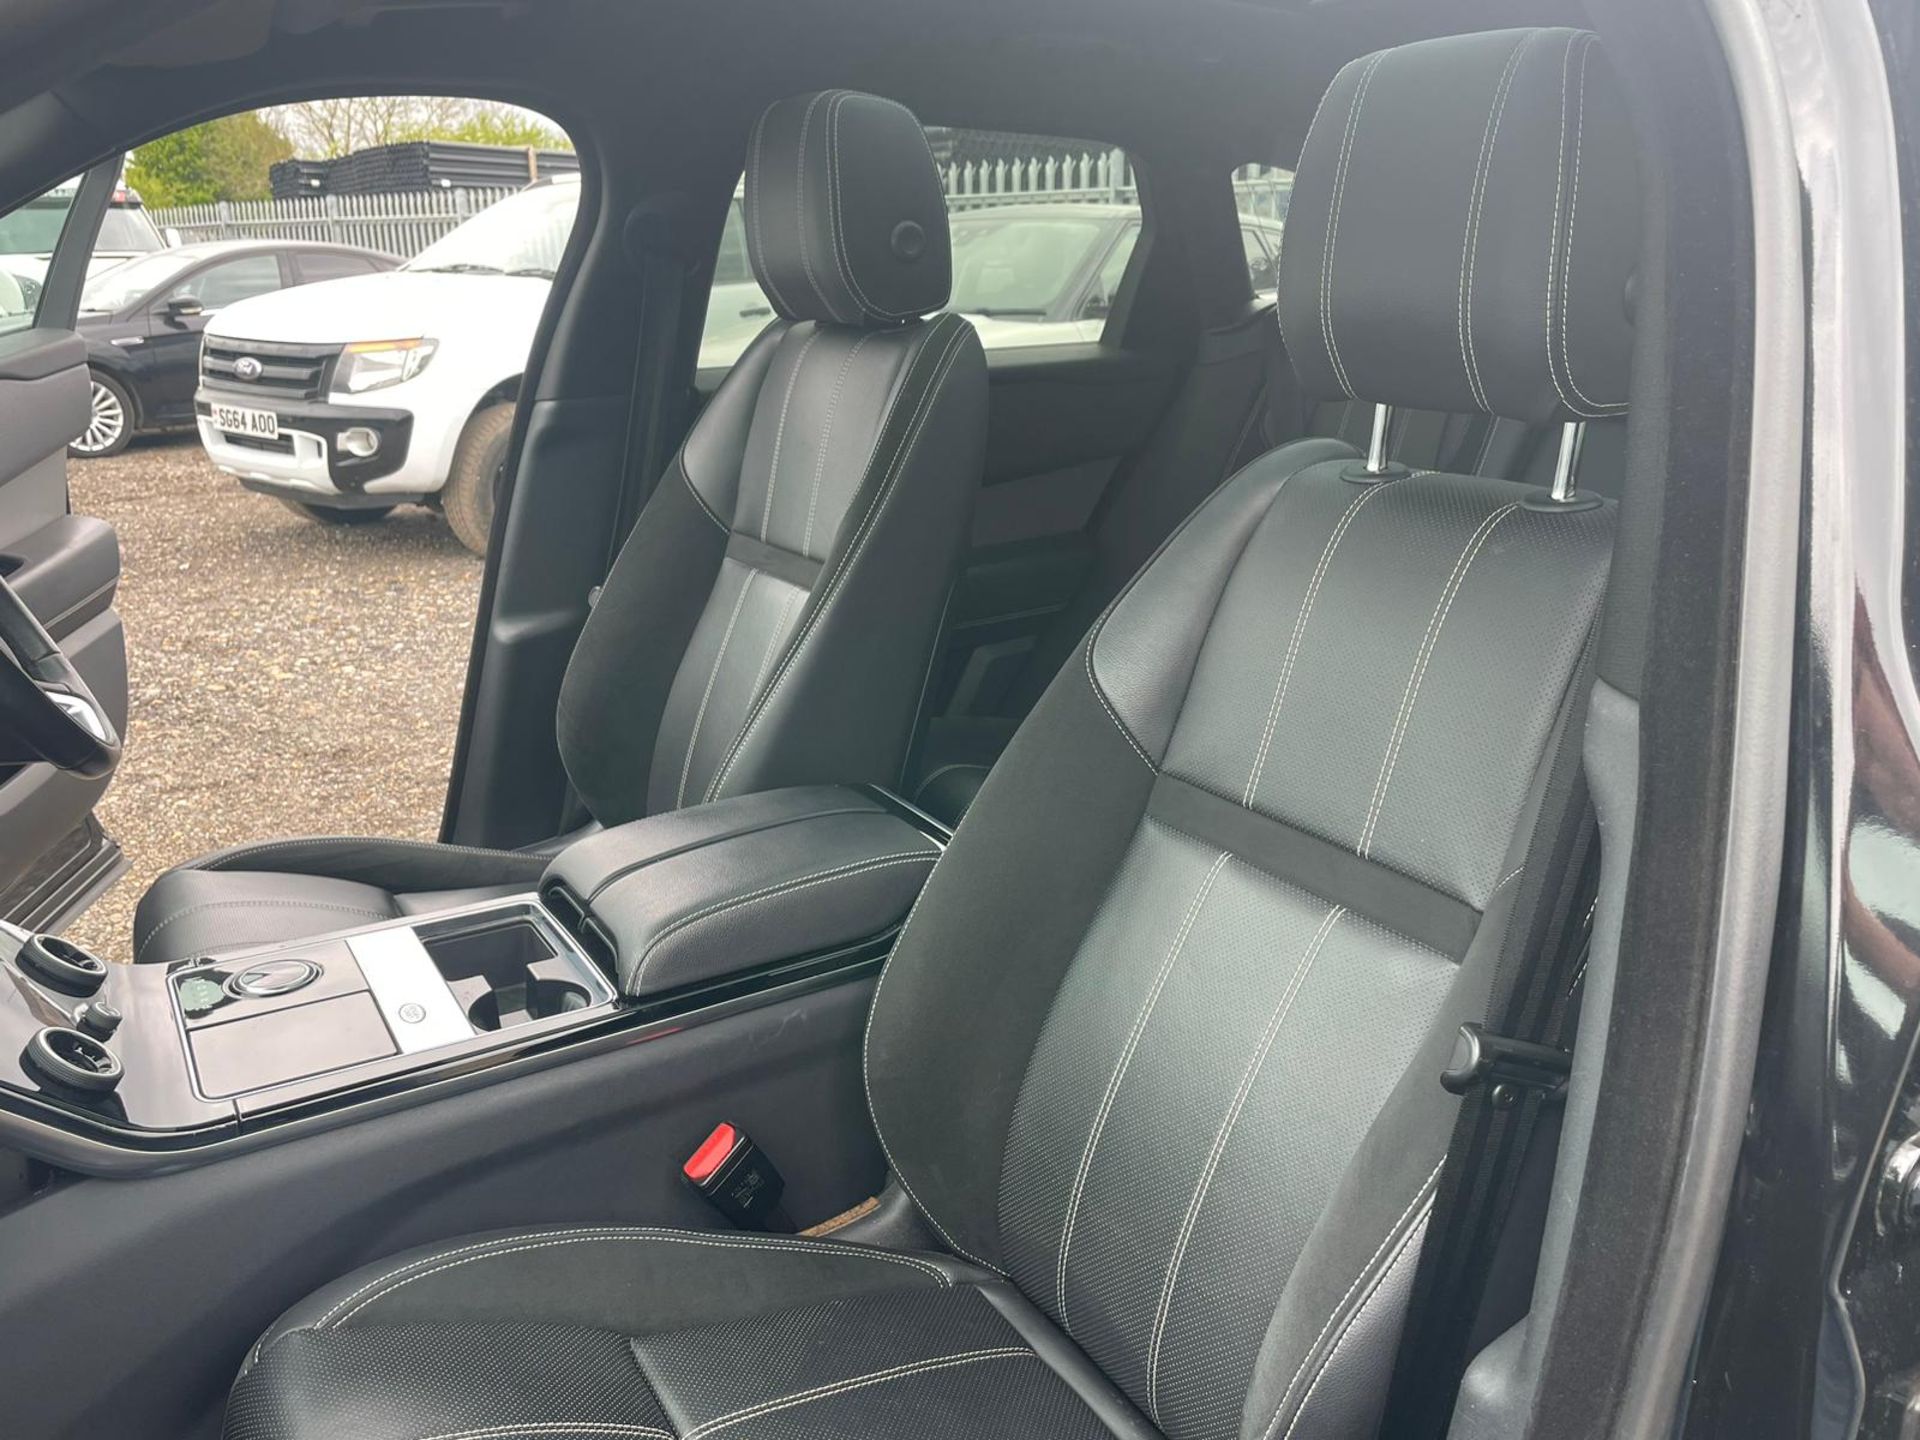 Land Rover Range Rover Velar 2.0 D240 R-Dynamic S 2018 '18 Reg' 4WD - Panoramic Roof- ULEZ Compliant - Image 23 of 33